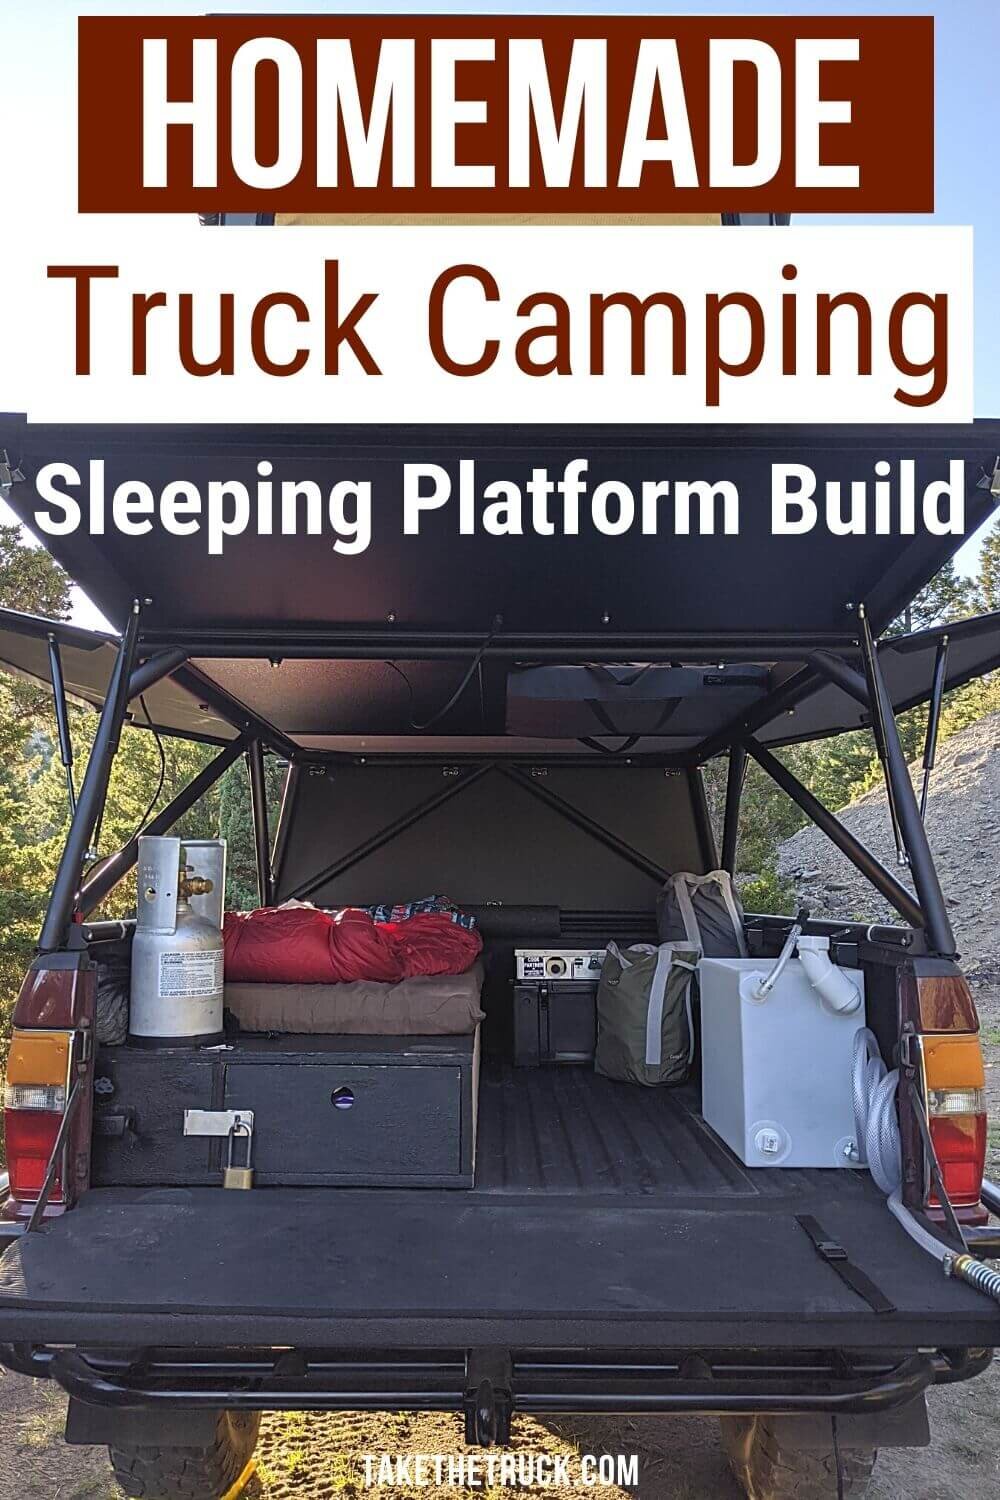 This post gives detailed truck bed camping platform plans and build instructions. The diy truck shell sleeping platform has a sliding truck drawer for more storage when you go camping in your pickup!